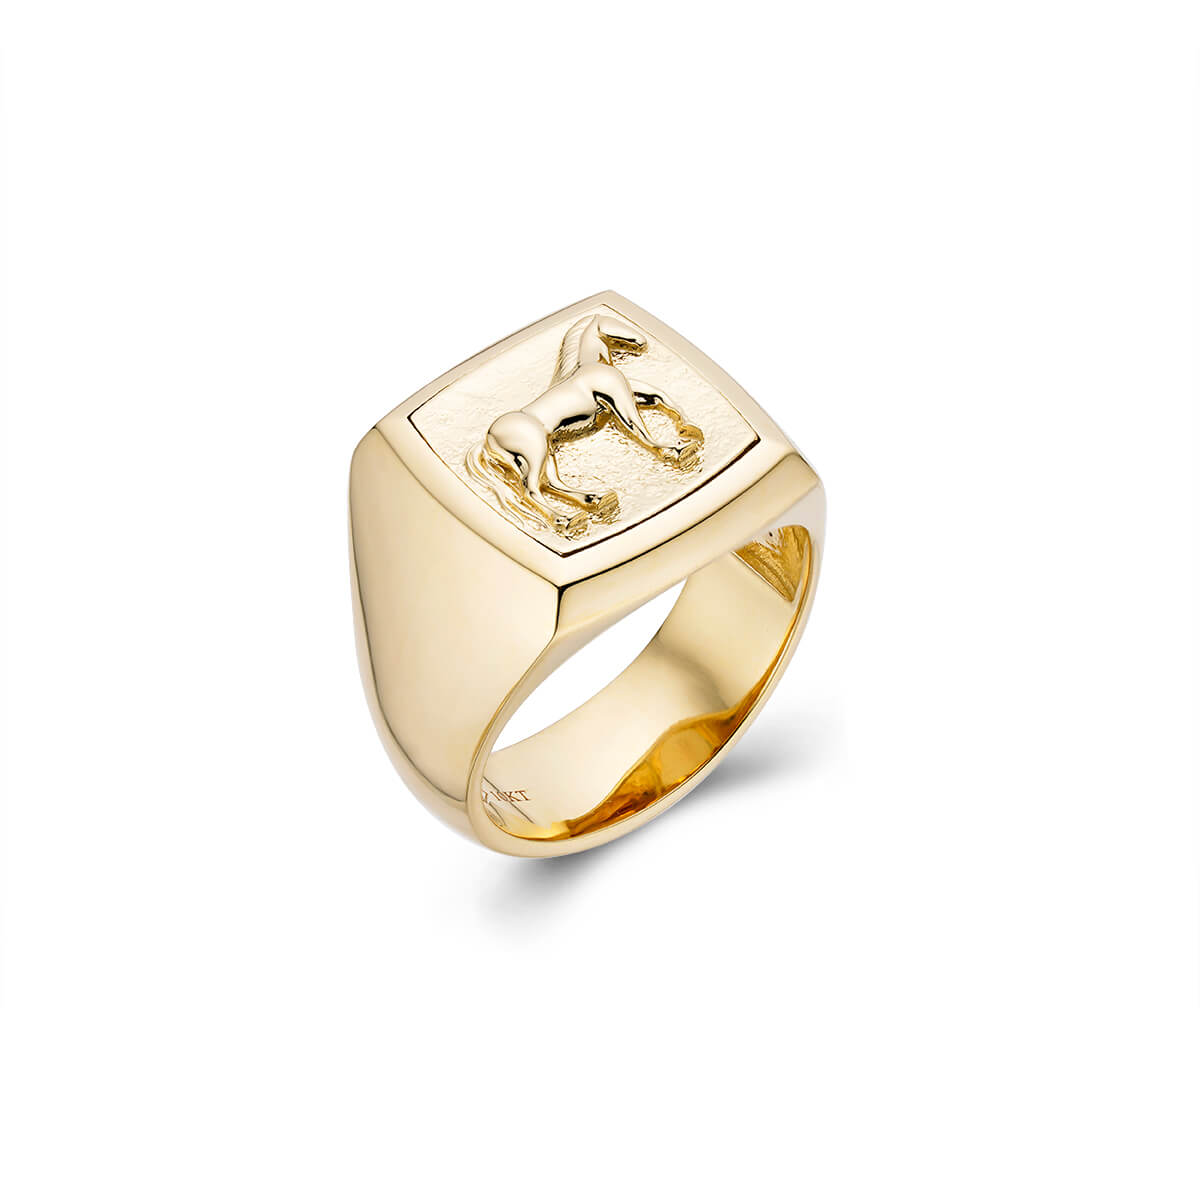 Men's Signet Rings: What They Are & How To Wear Them